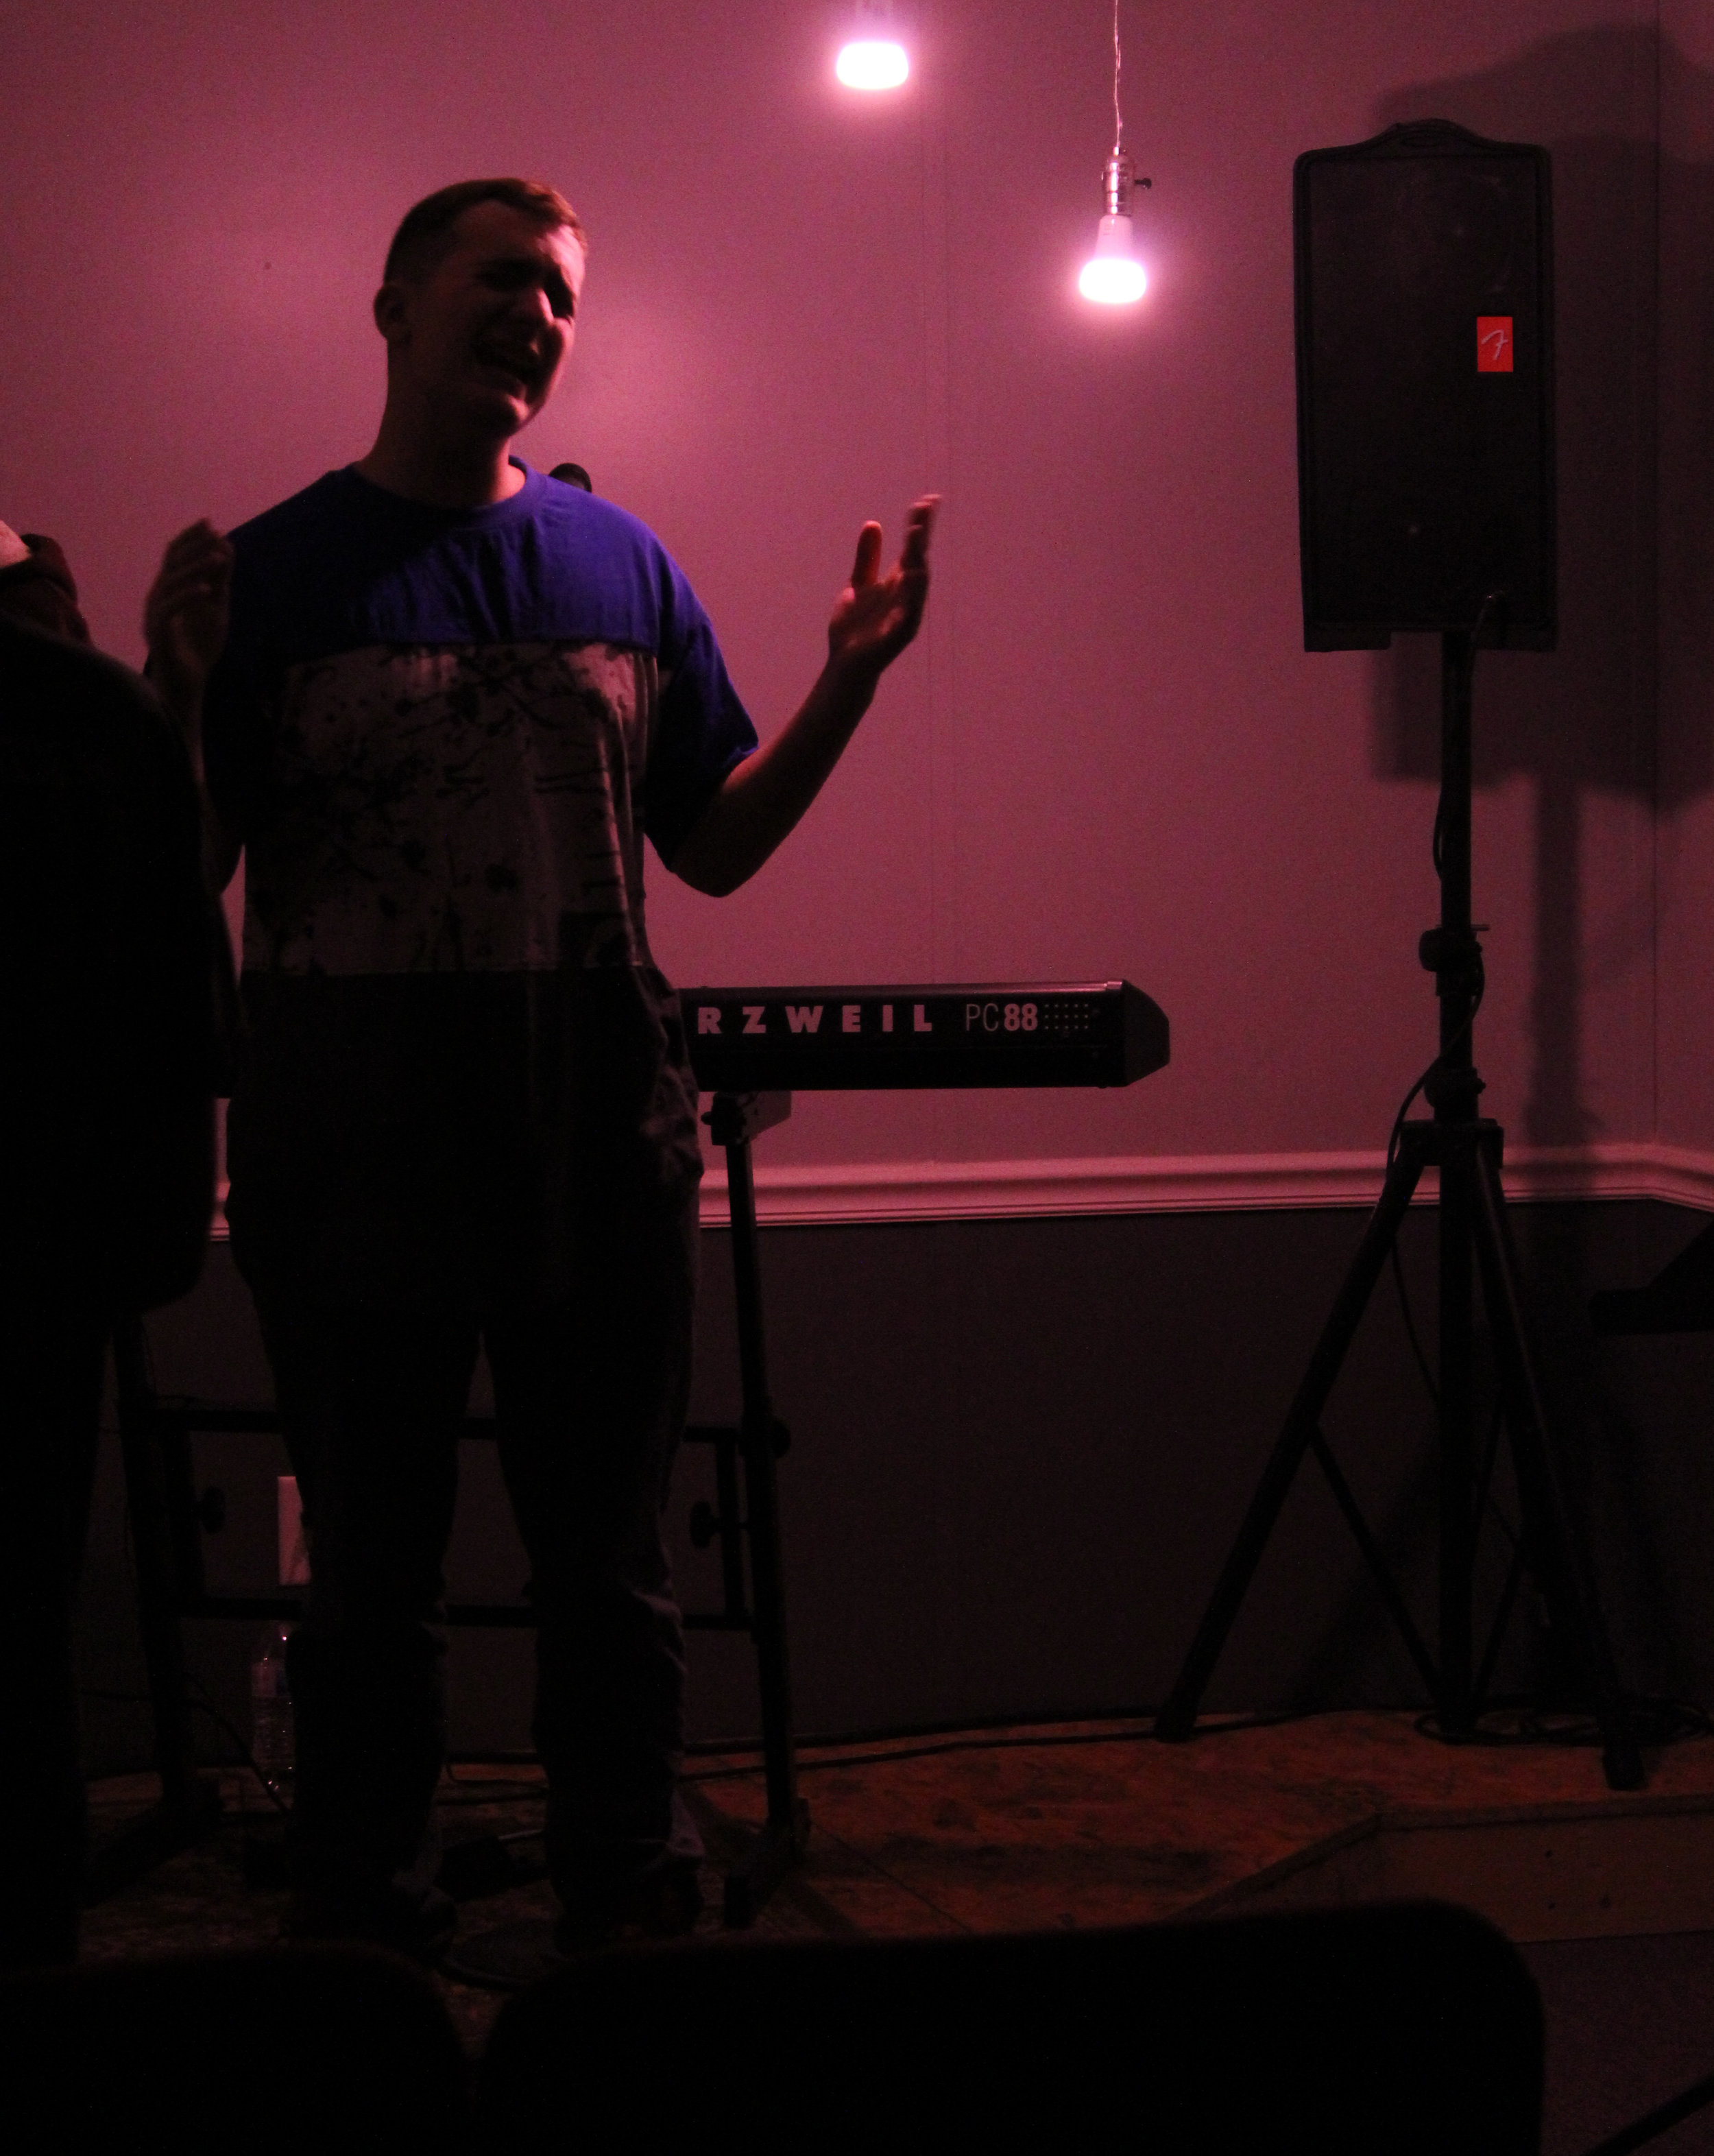 In the White Flag Youth Ministry, ranging from ages 12-18, students are encouraged to seek after God daily and are taught biblical and relatable material week after week. Pictured here is Noah Milholan singing on stage and worshipping God.